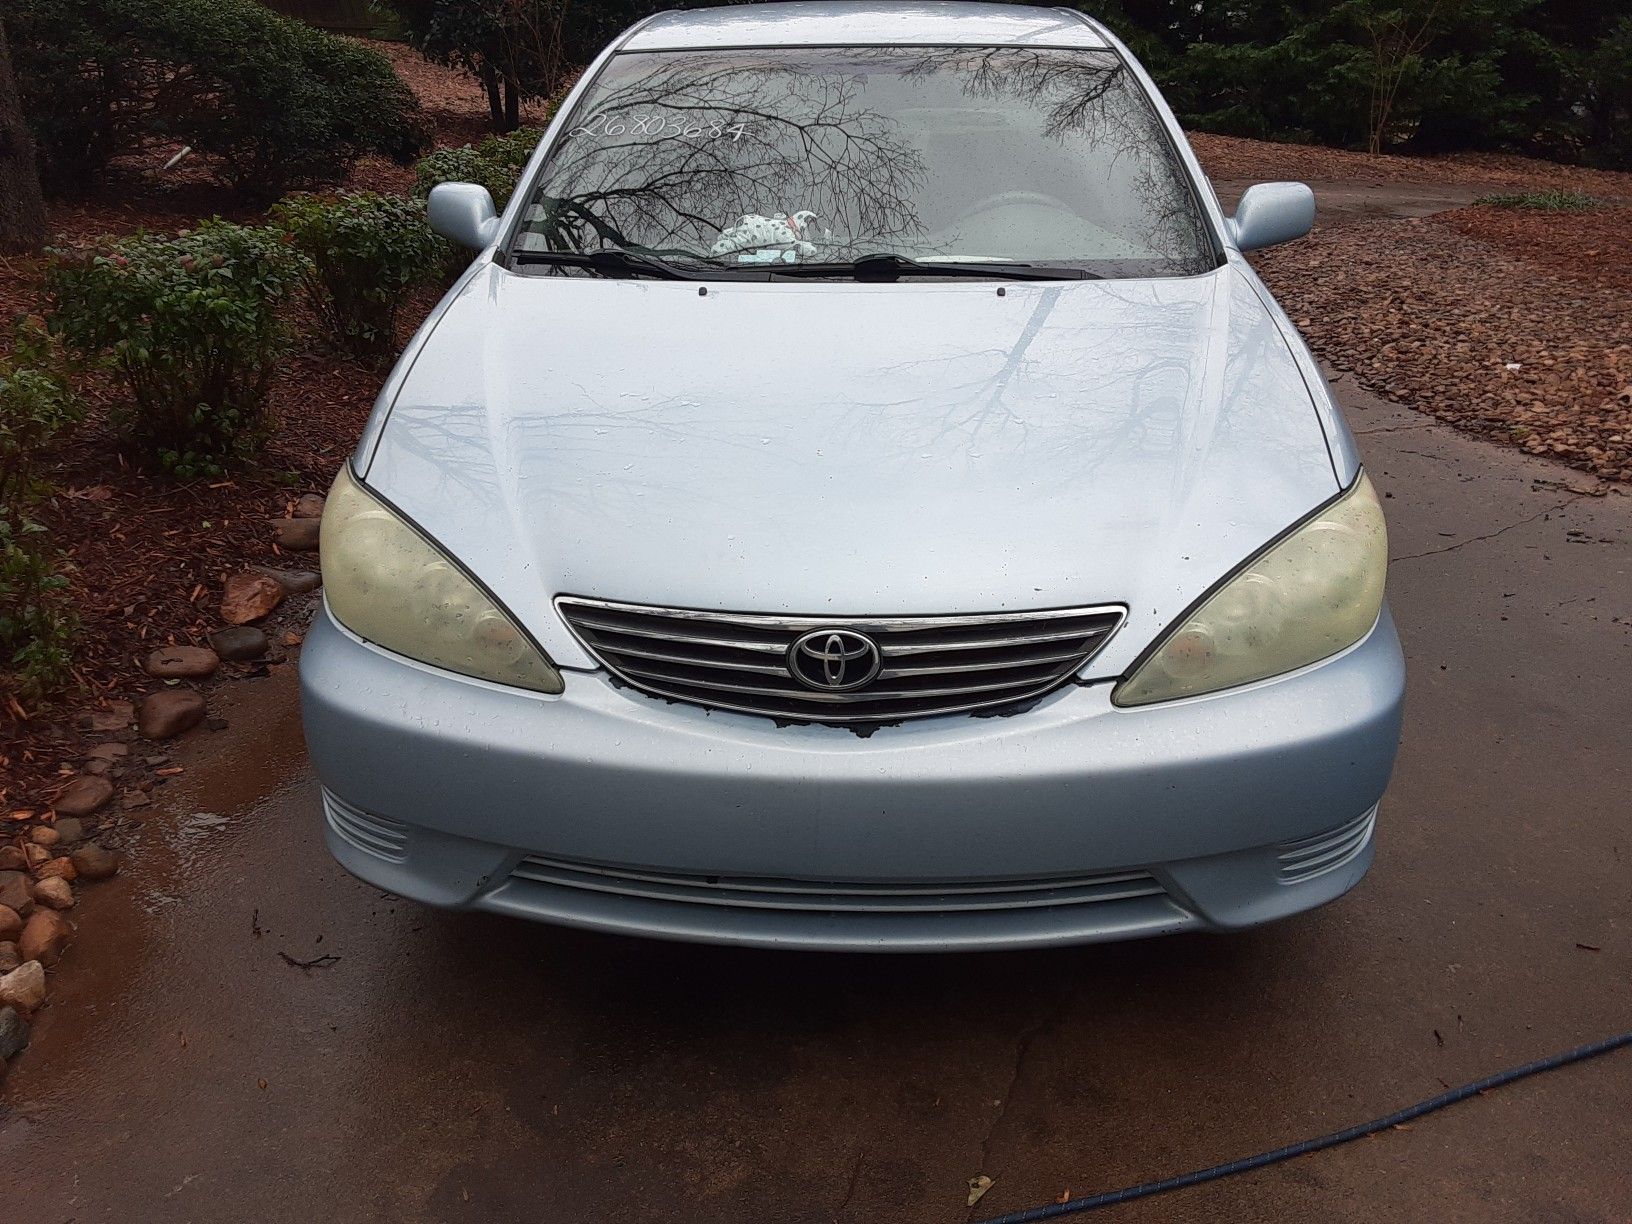 2005 Camry for parts not running